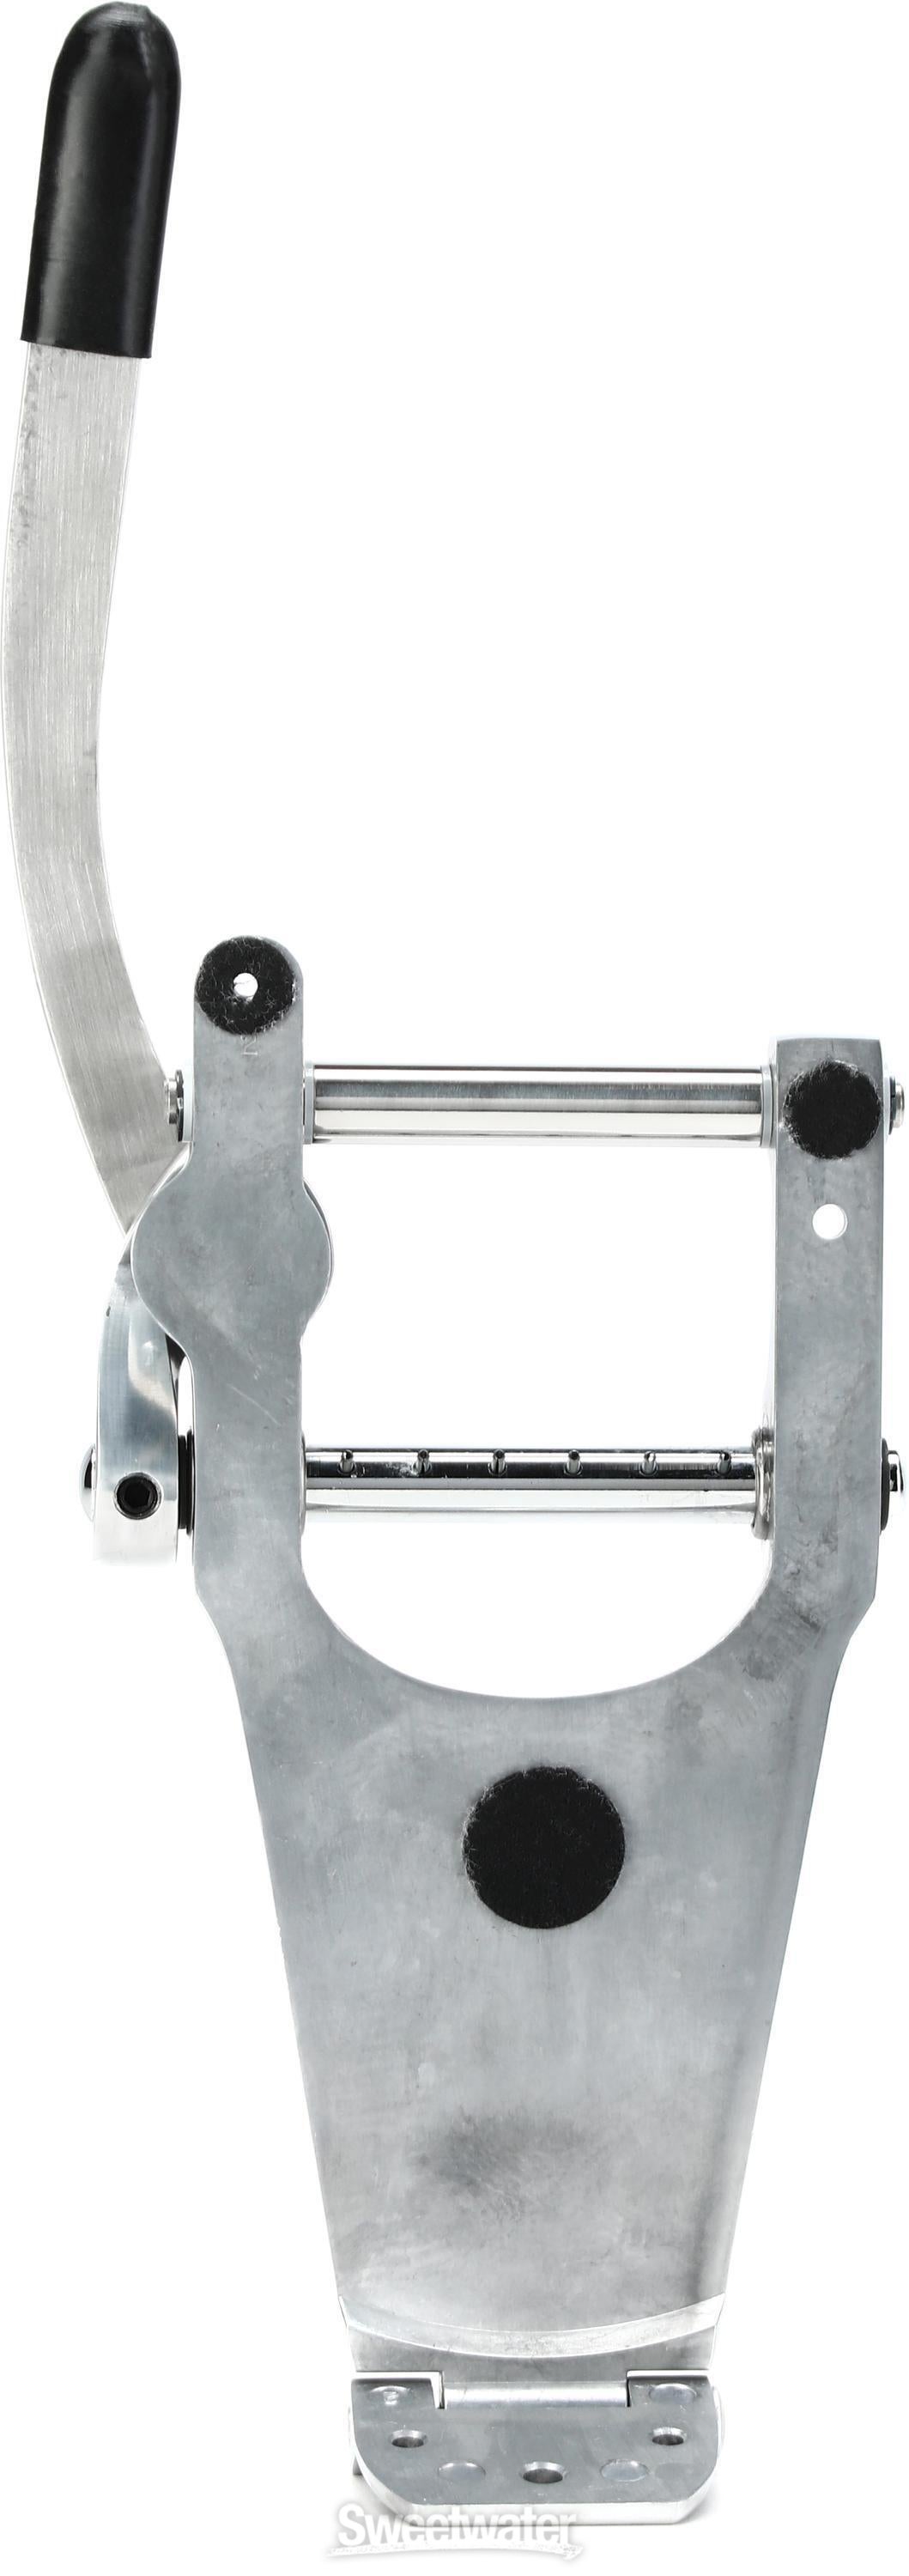 Bigsby B70 Vibrato Tailpiece Assembly - Aluminum | Sweetwater